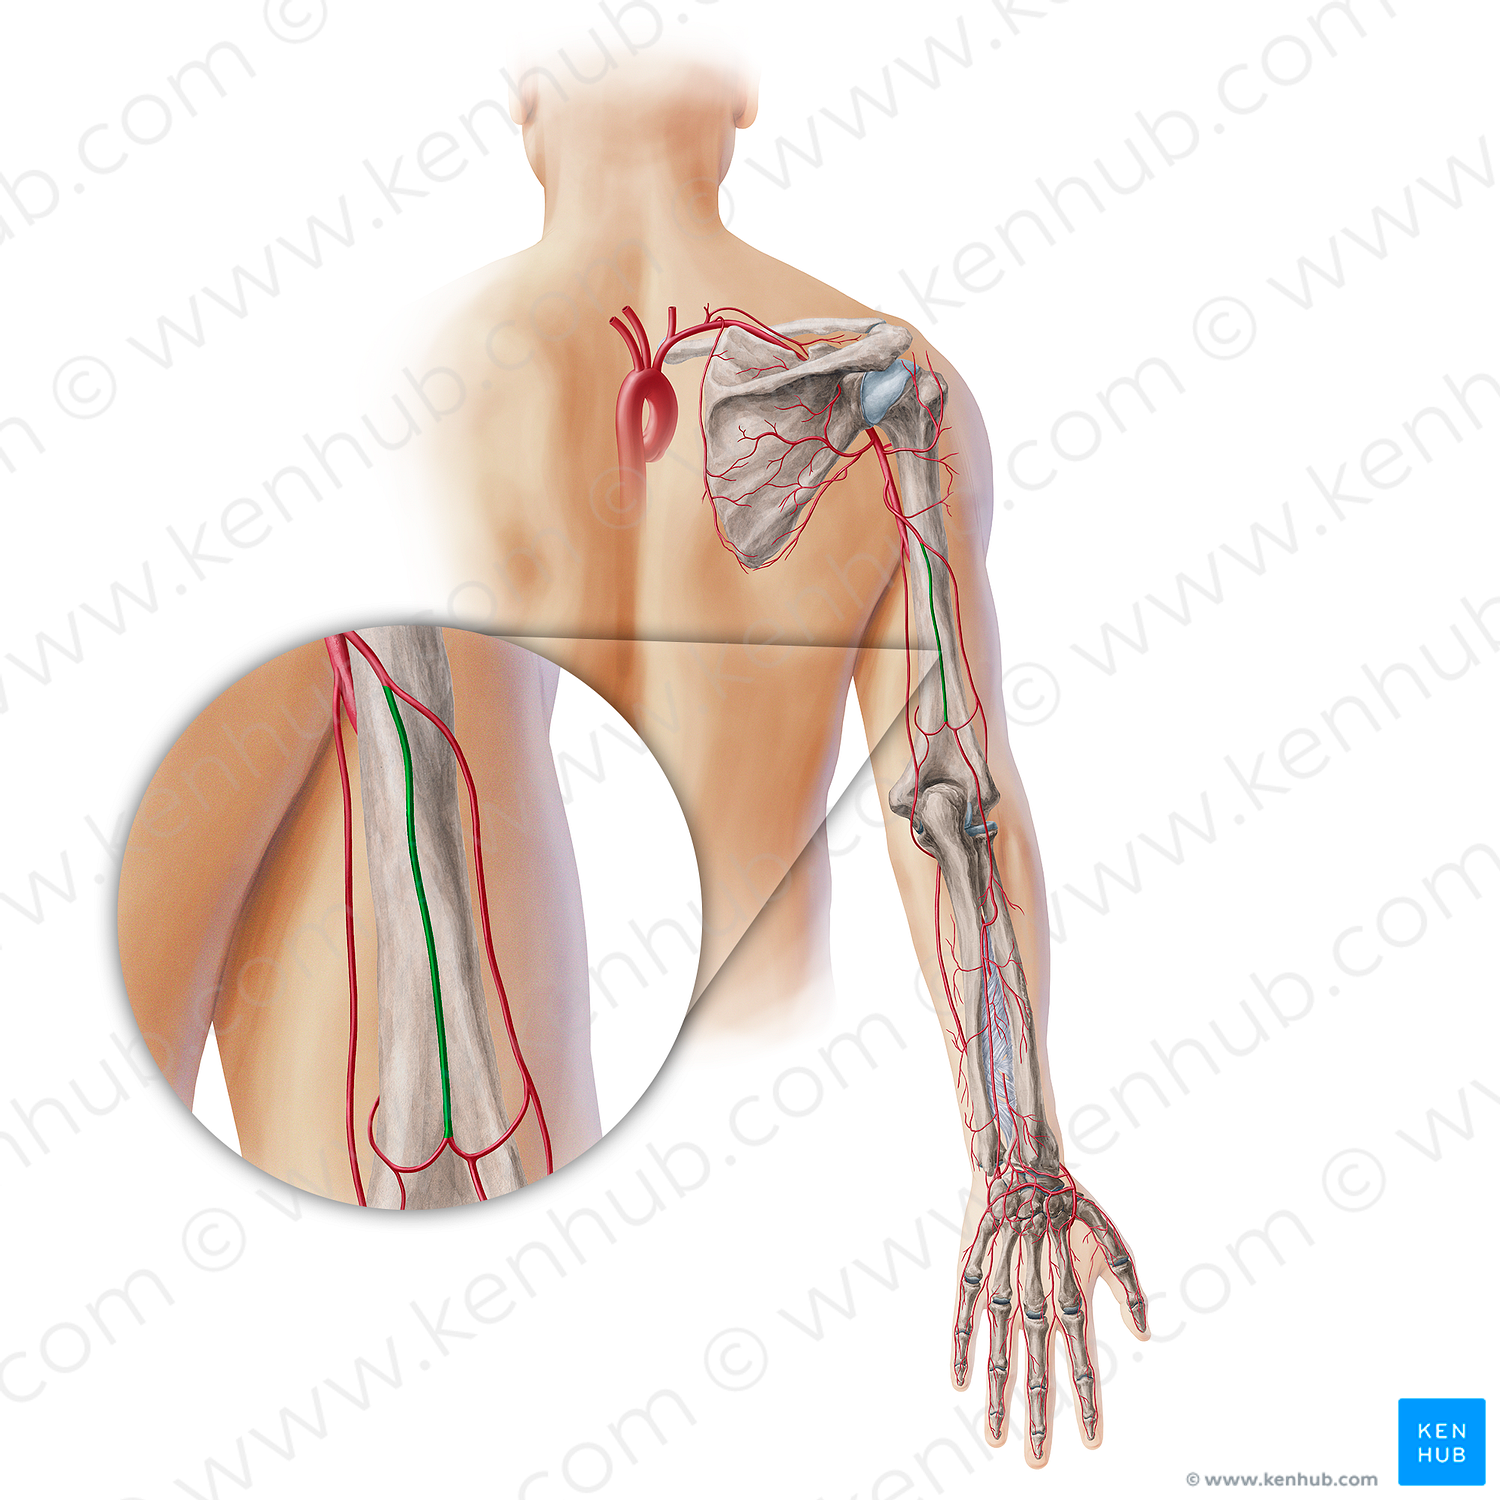 Middle collateral artery (#18937)